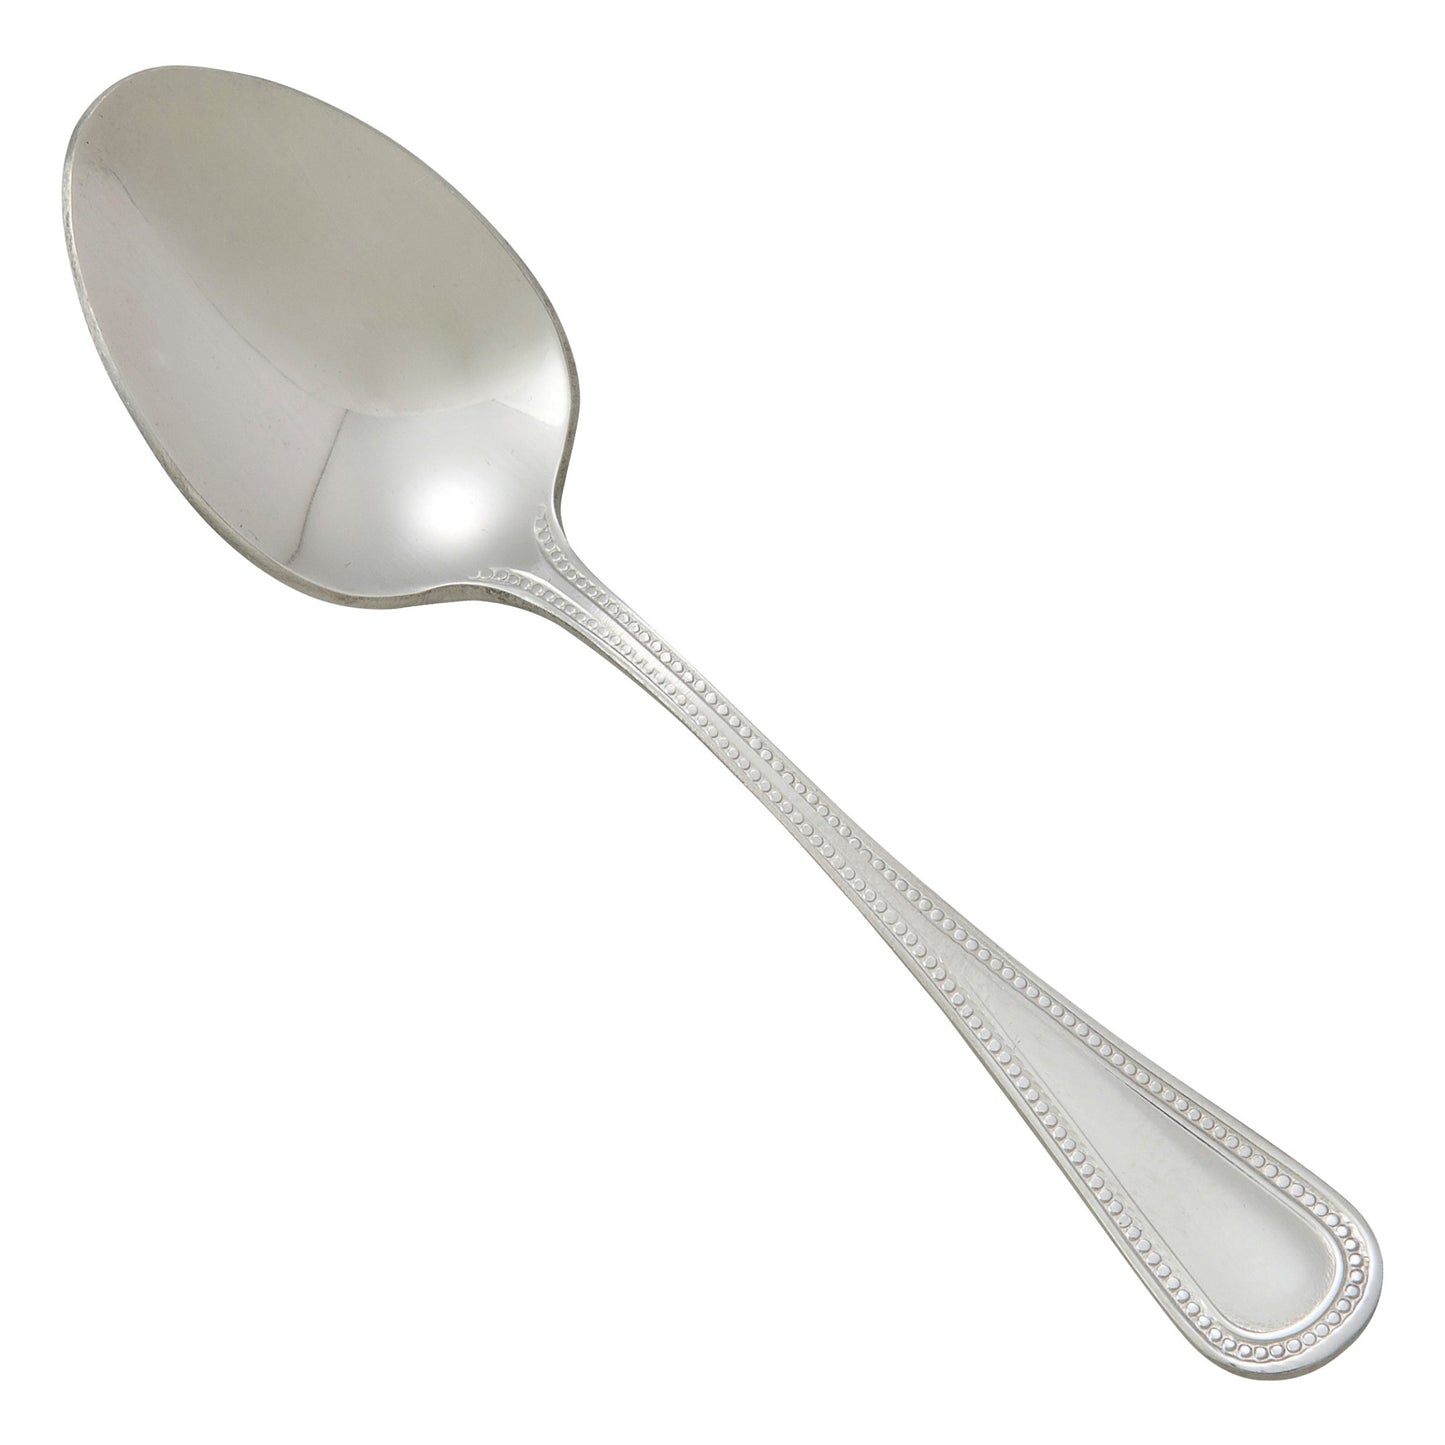 0036-09 - Deluxe Pearl Demitasse Spoon, 18/8 Extra Heavyweight